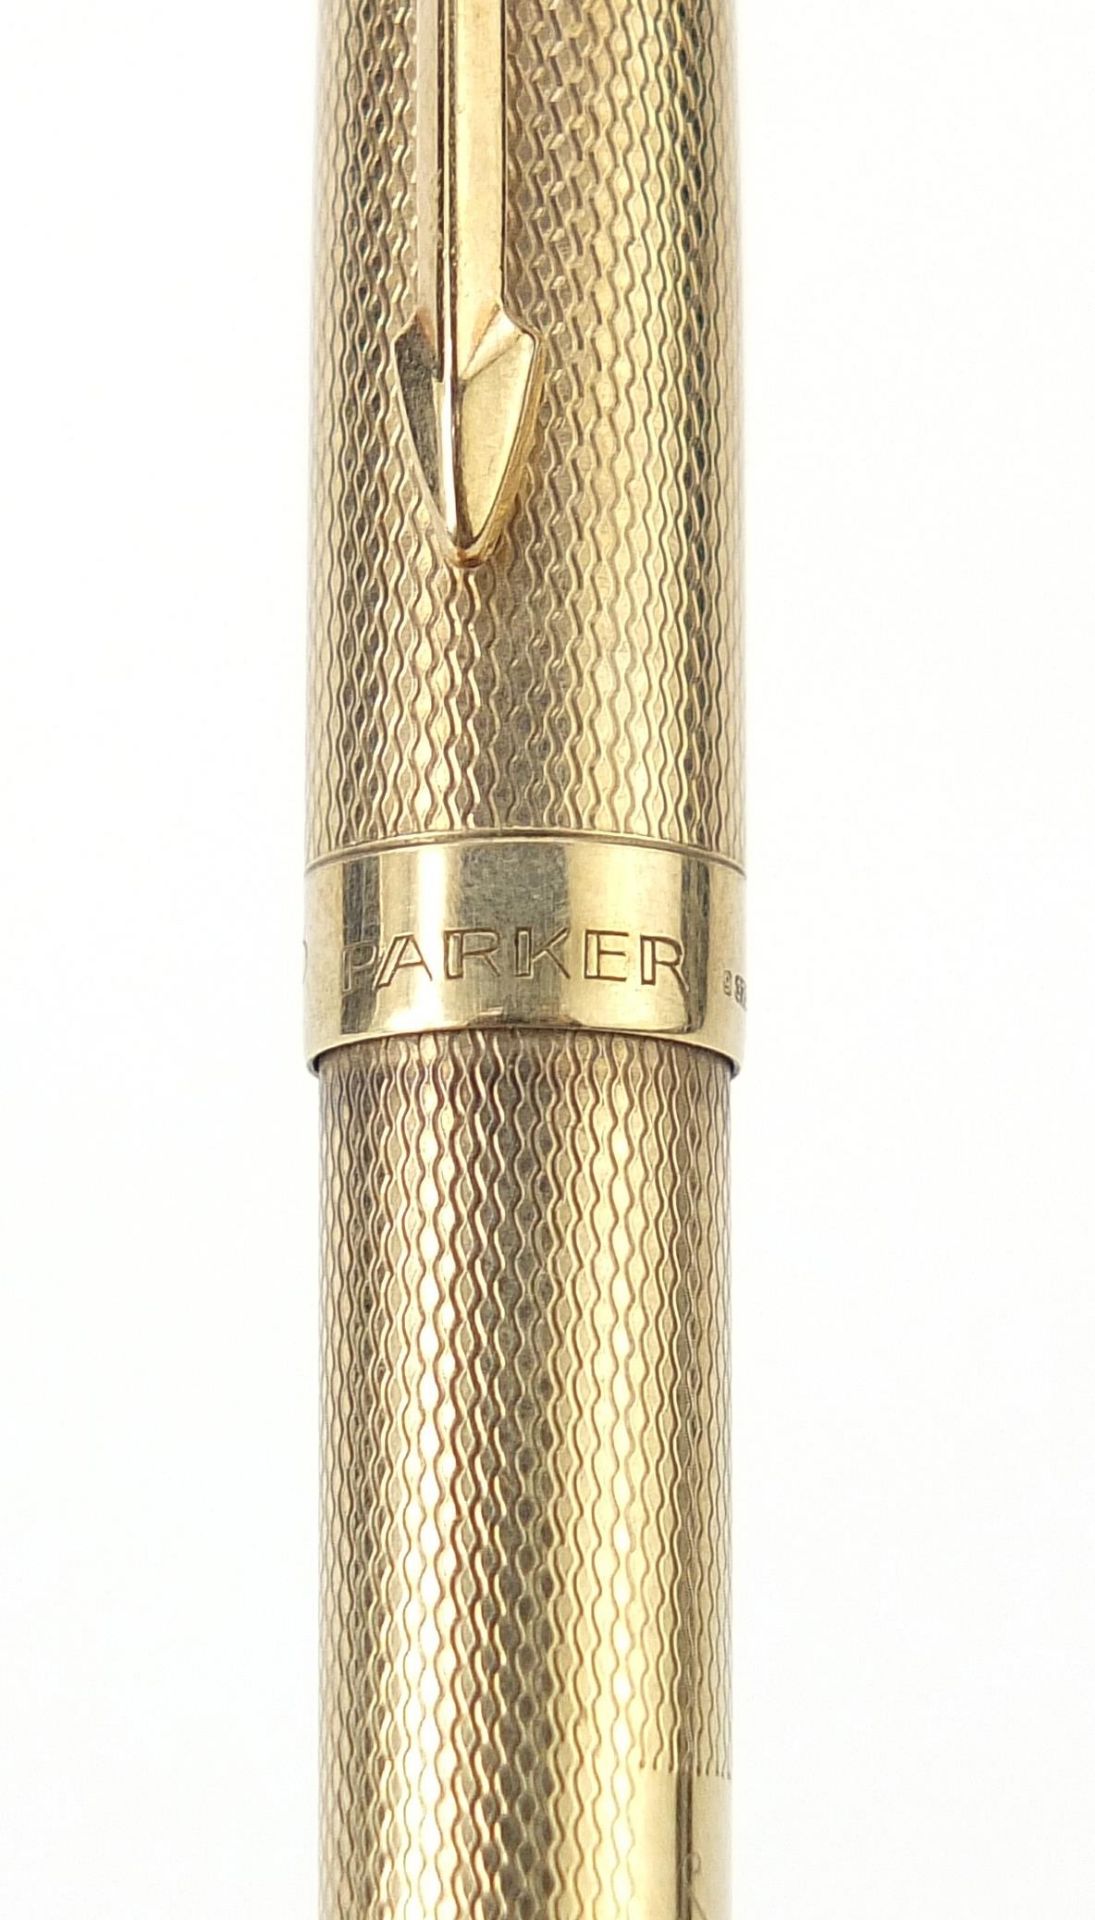 Parker, 9ct gold cased Biro pen with engine turned body, 12.8cm in length, 18.5g - Image 4 of 5